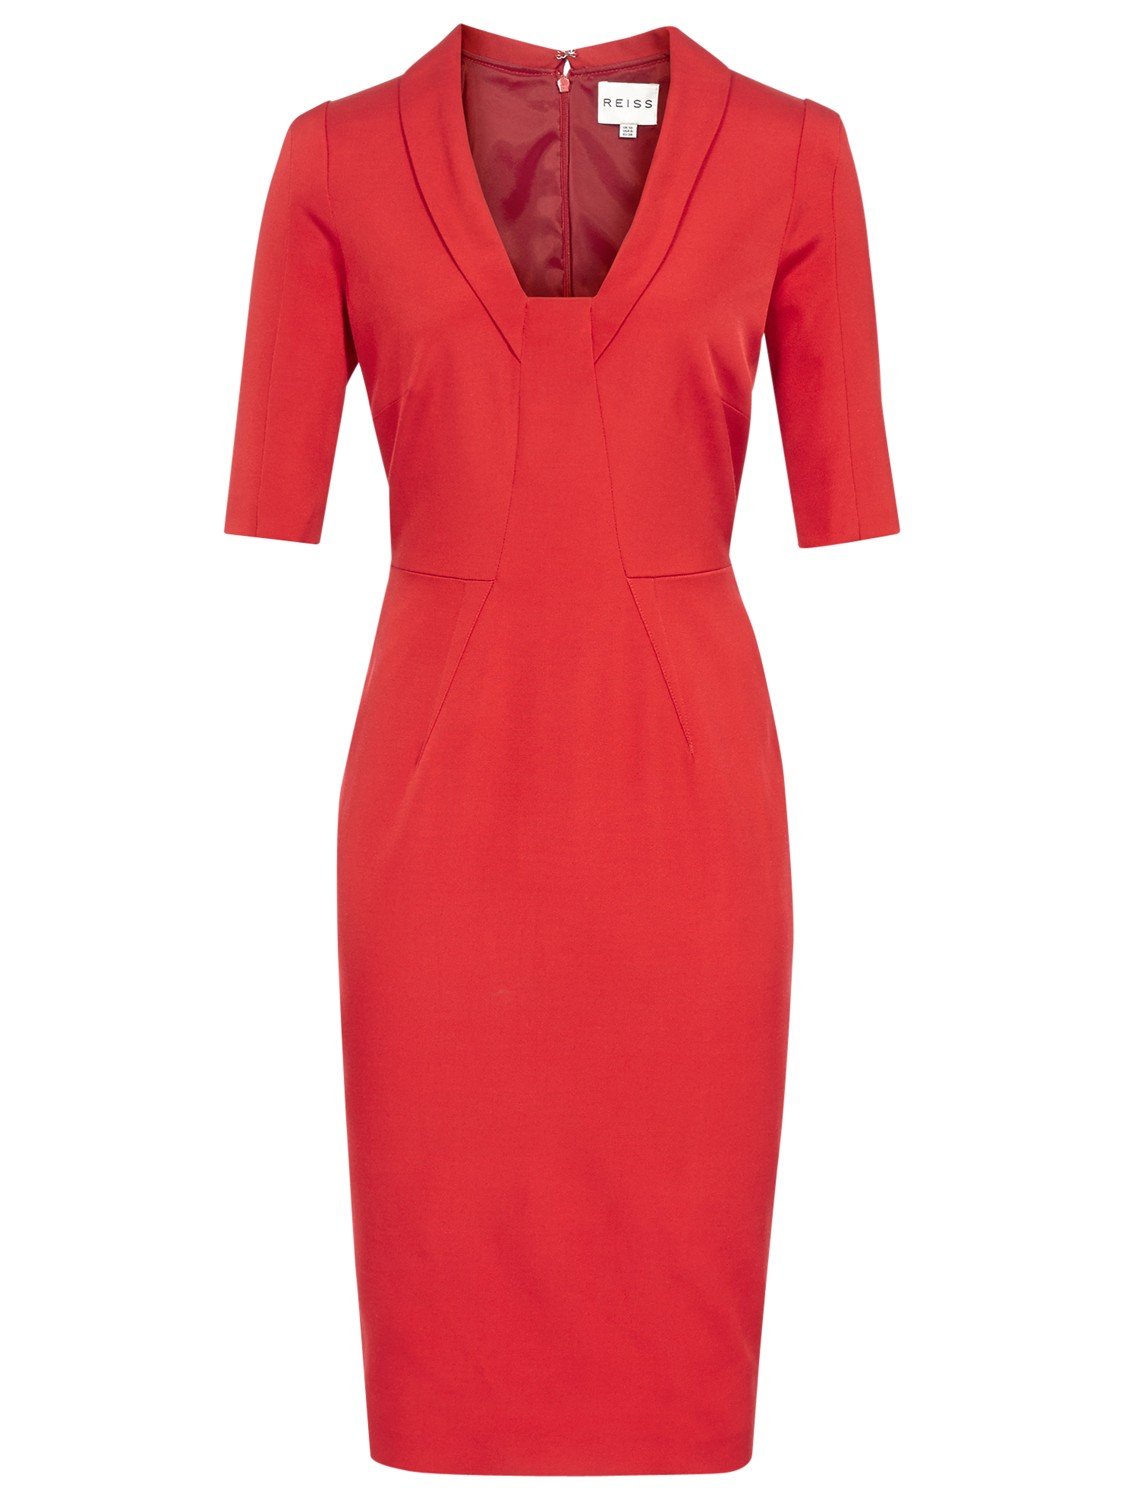 Reiss Angel Fitted Panel Dress in Red (Bordeaux) | Lyst